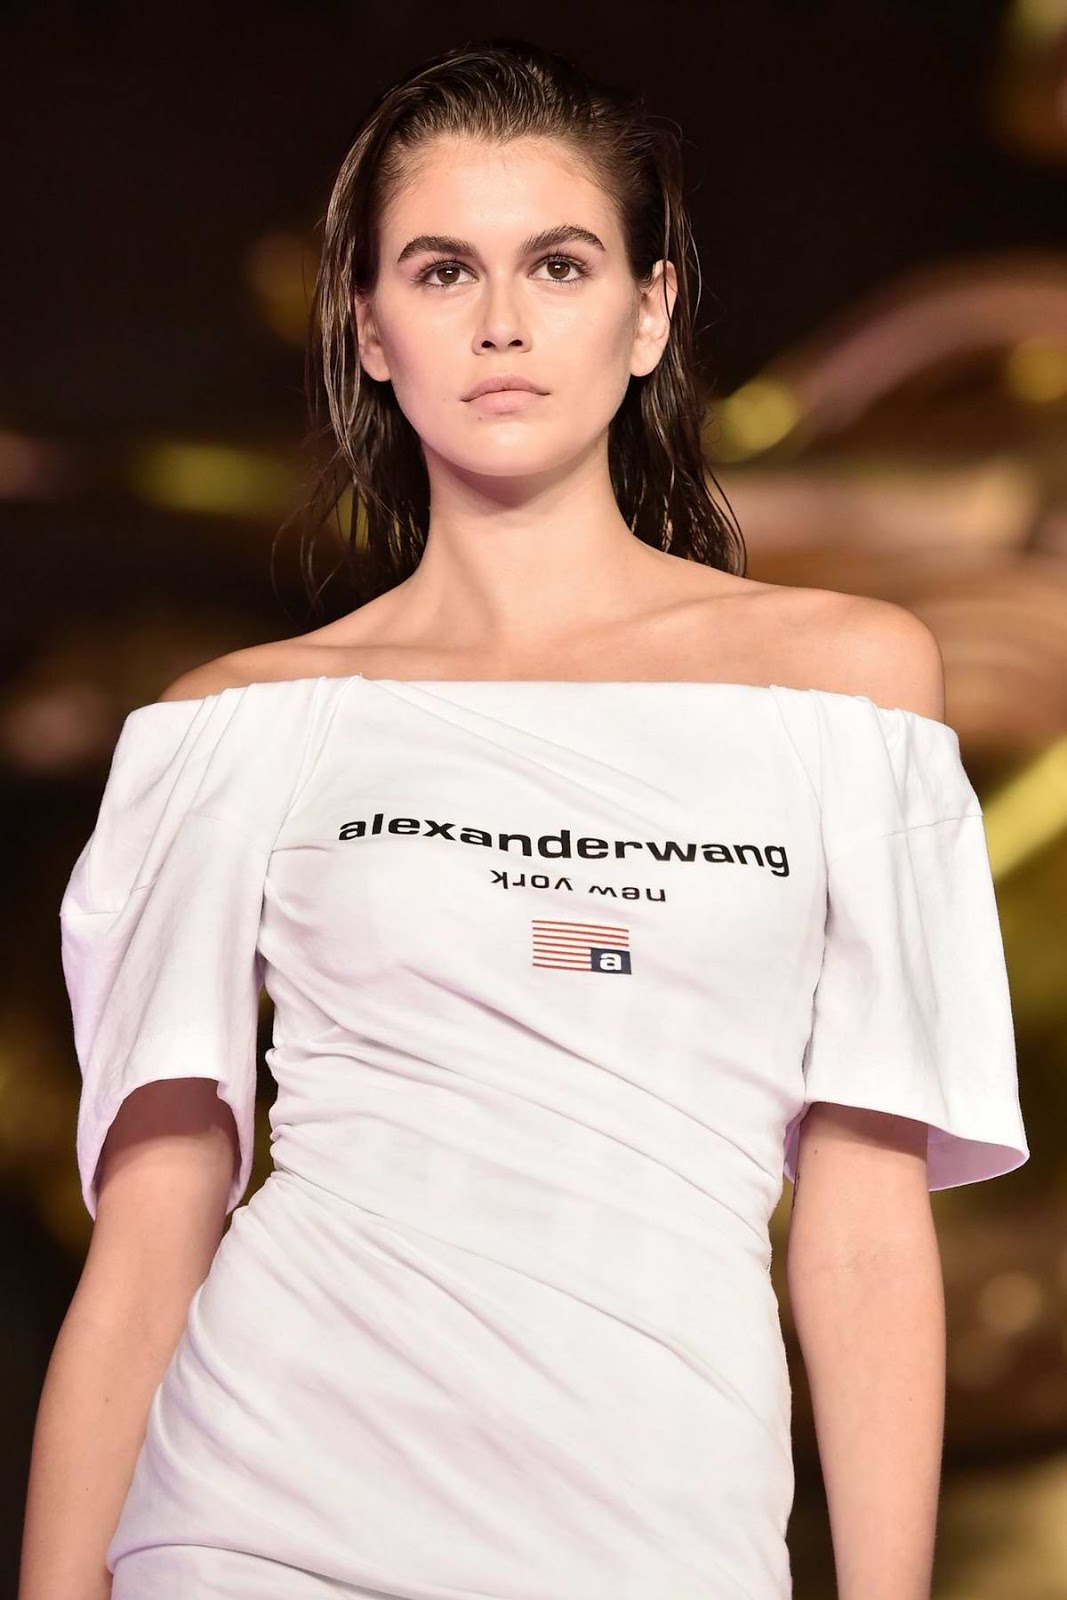 Kaia Gerber walks the runway during the Alexander Wang Collection 1 Fashion Show at Rockefeller Center in New York City